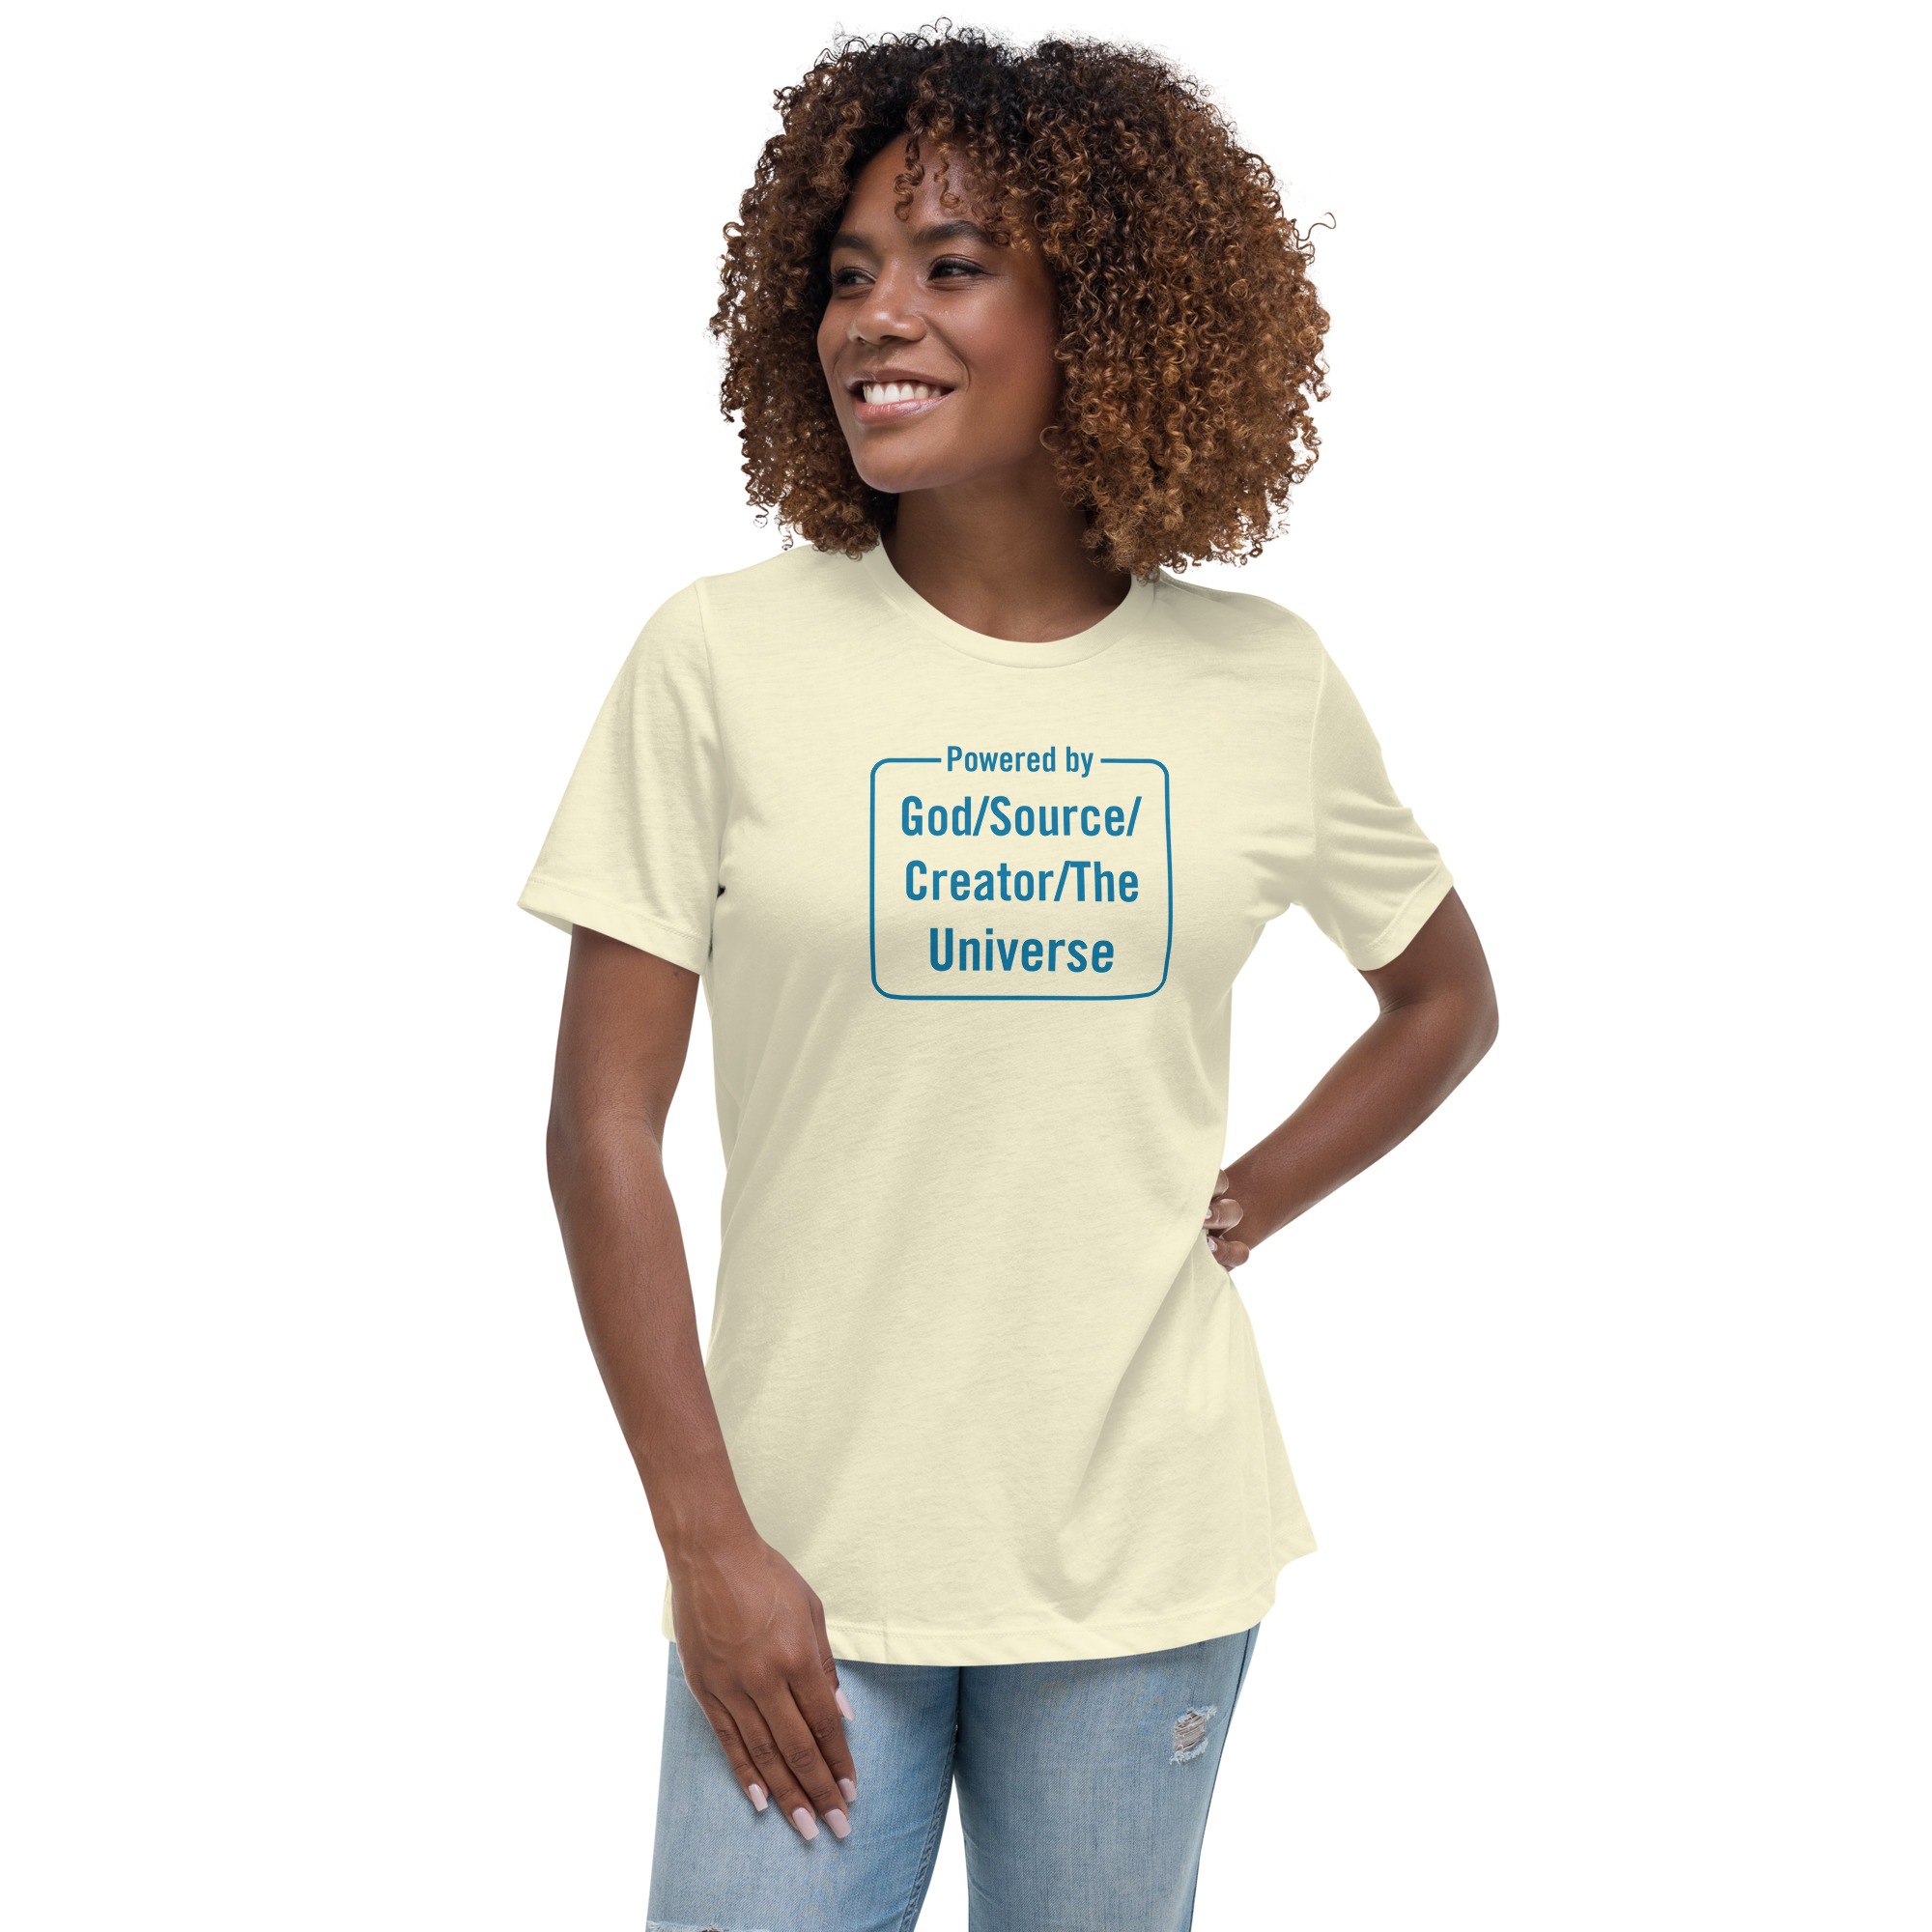 Powered By God/Source/Creator/The Universe T-shirt